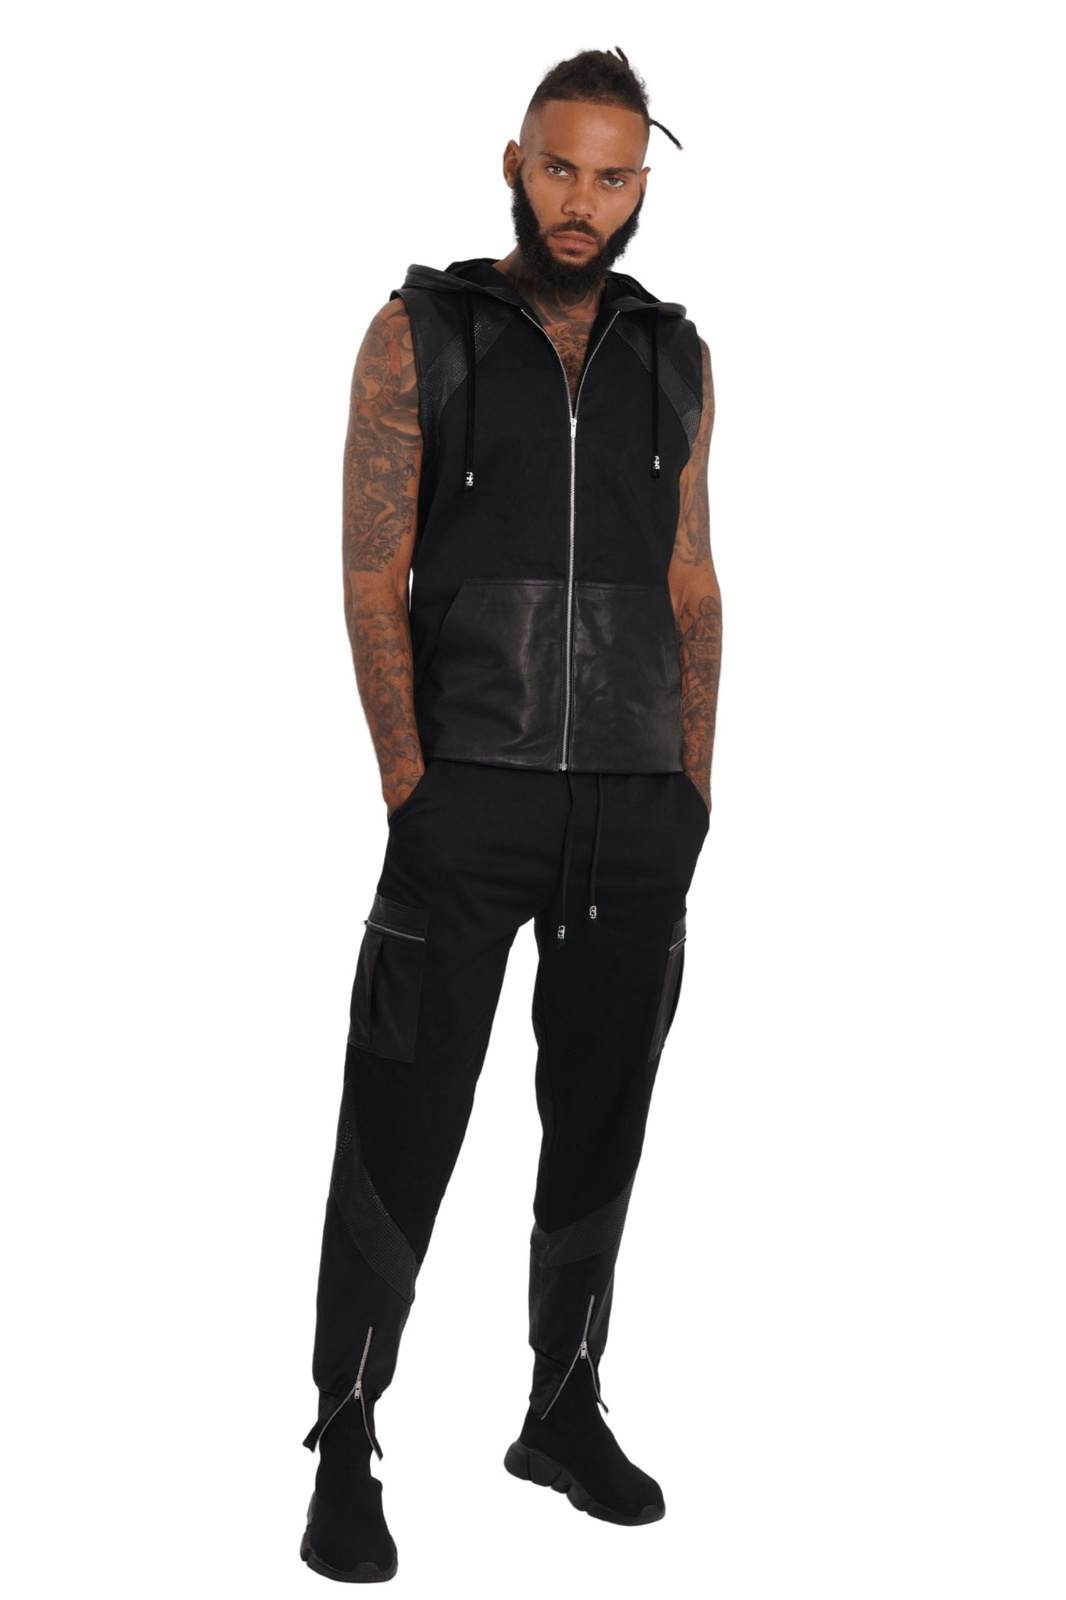 Obsidian Mens Black Leather Joggers with cargo pockets from Love Khaos.